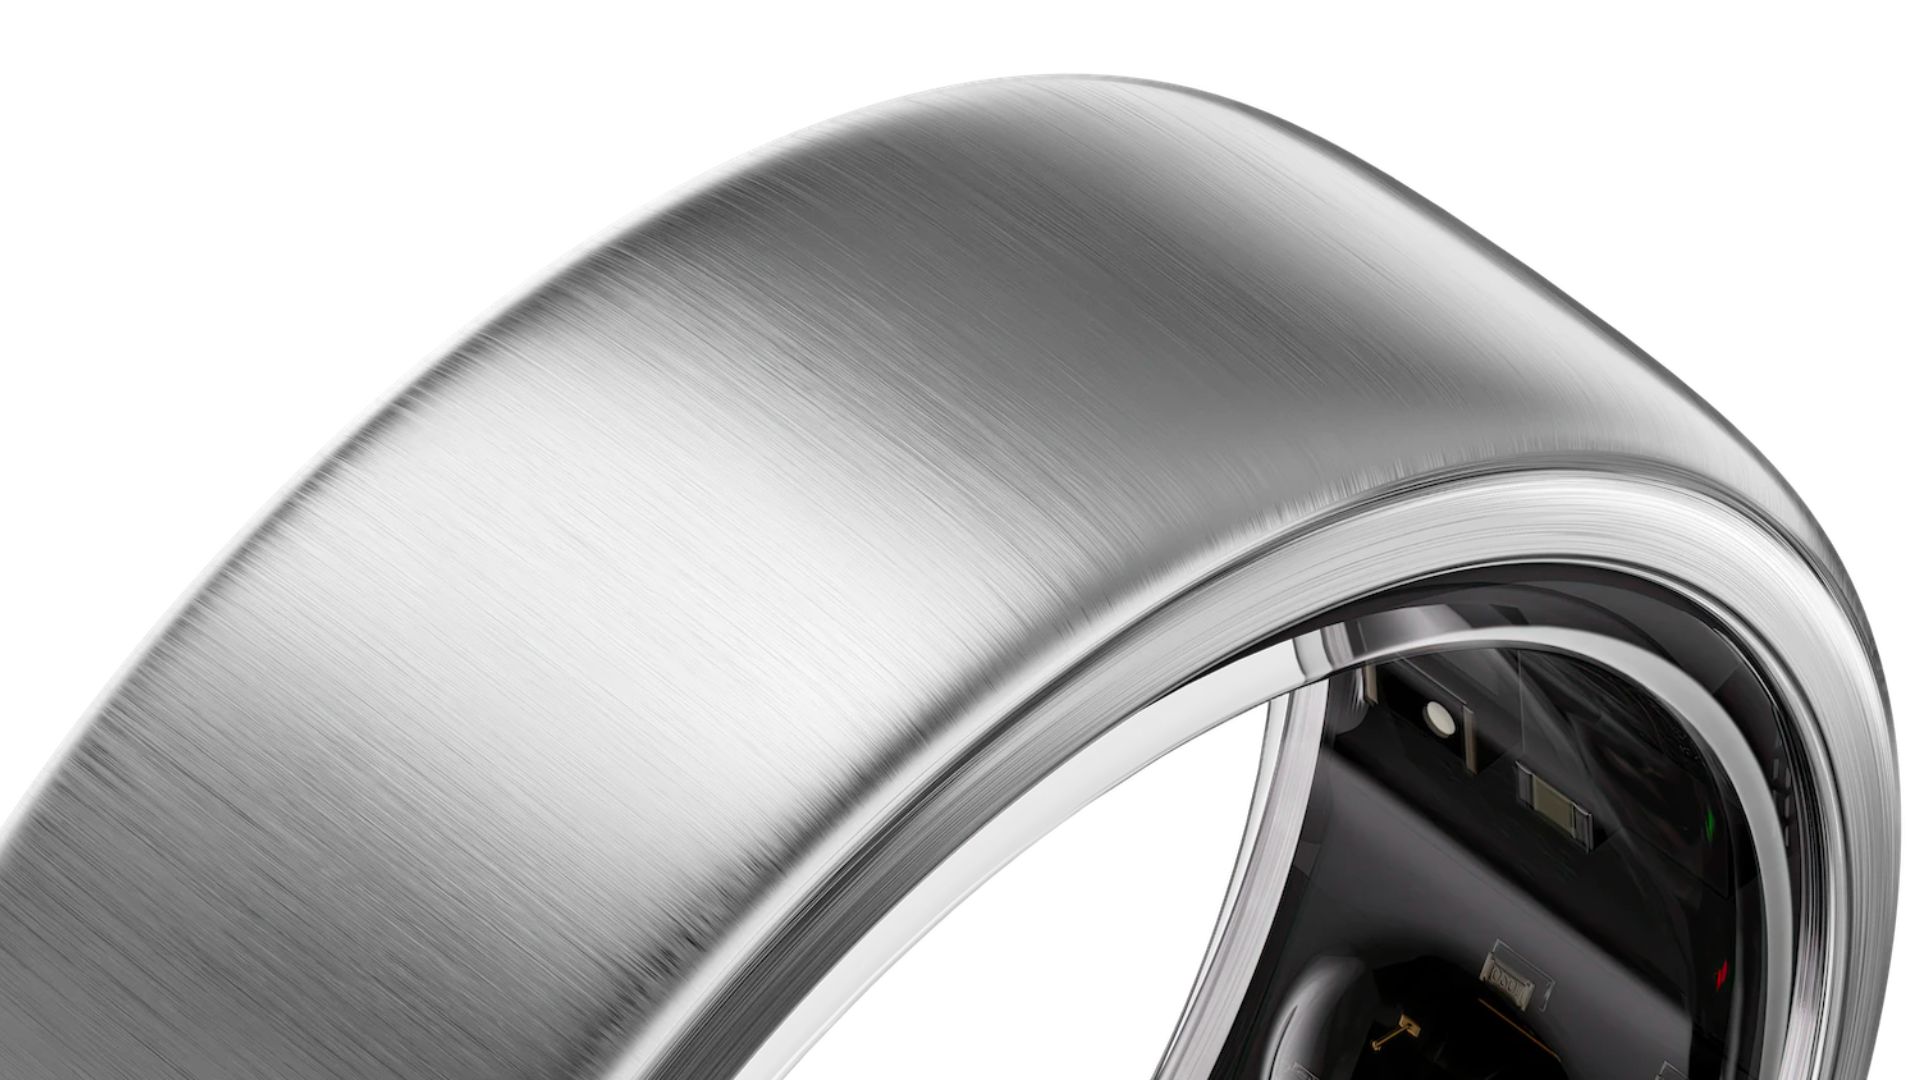 Future Apple Ring tipped to join the company's wearable category as Oura, Samsung, and others are placed on notice